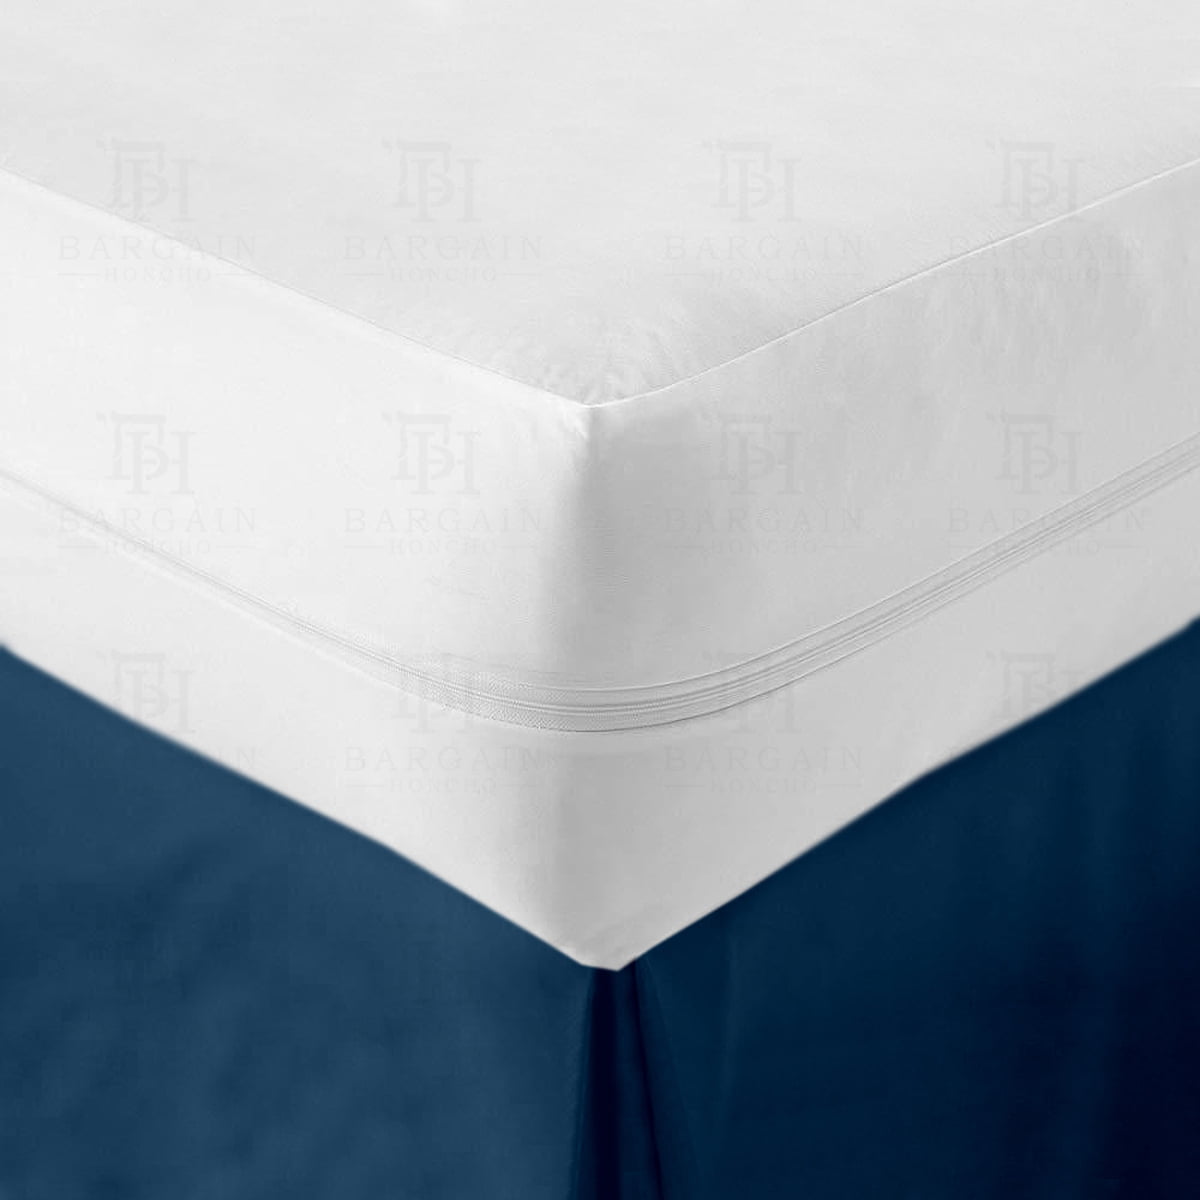 Soft and Smooth Bamboo Fabric Mattress Cover Fits Most Baby Portable Cribs 100% Waterproof Crib Mattress Protector Formaldehyde Free Mattress Pad 9 inches Bable Mattress Cover 28 X 52 